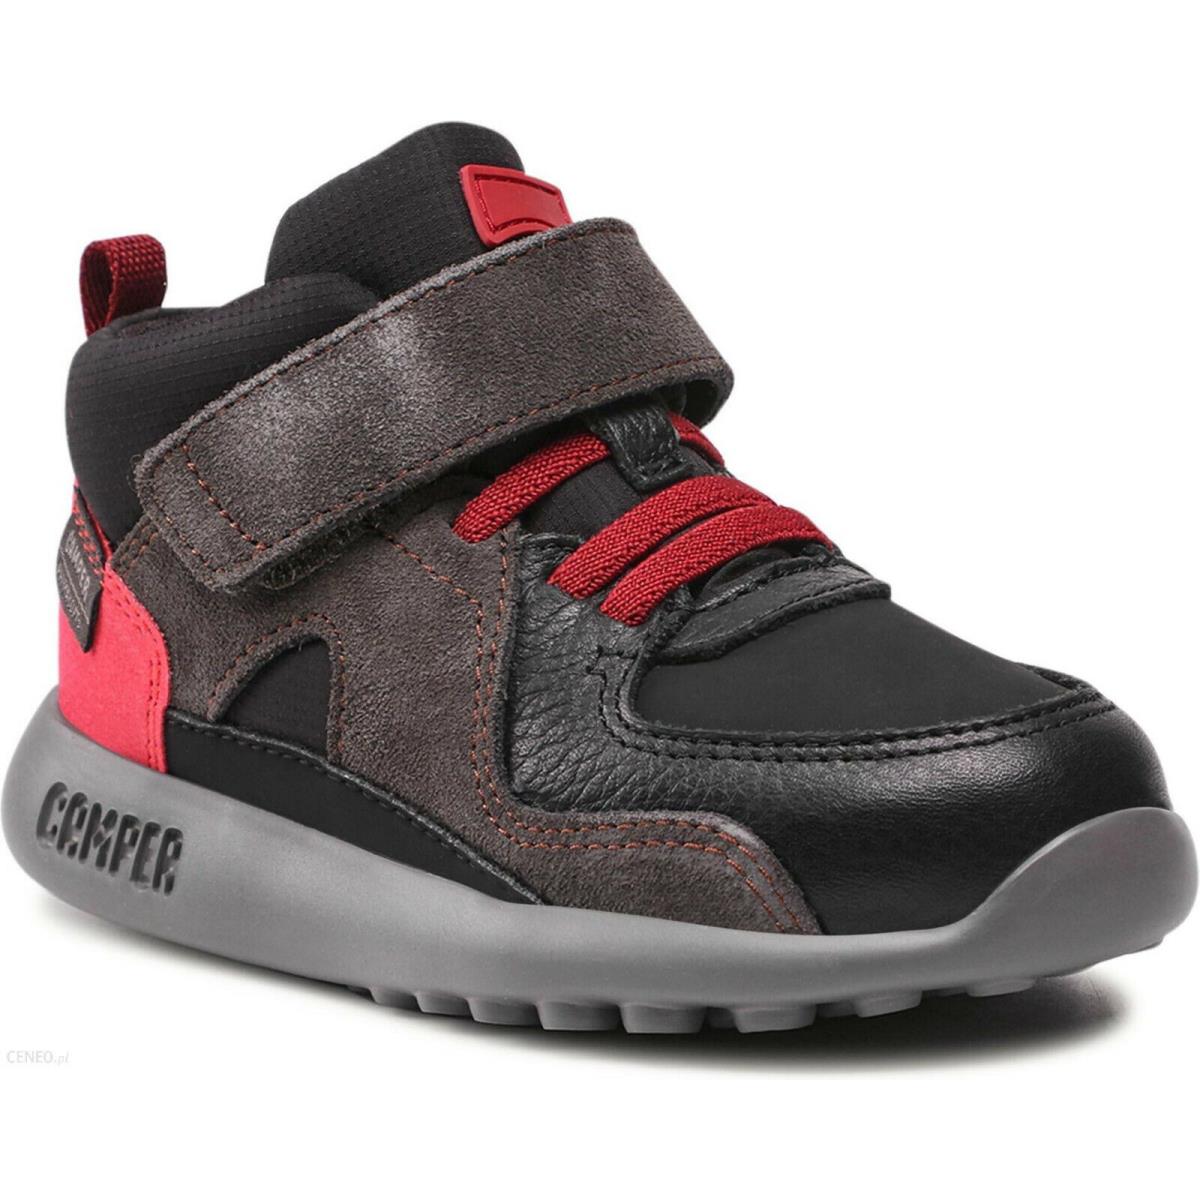 Boys Camper Driftie Ankle Sneaker Black Red Insulated Shoes